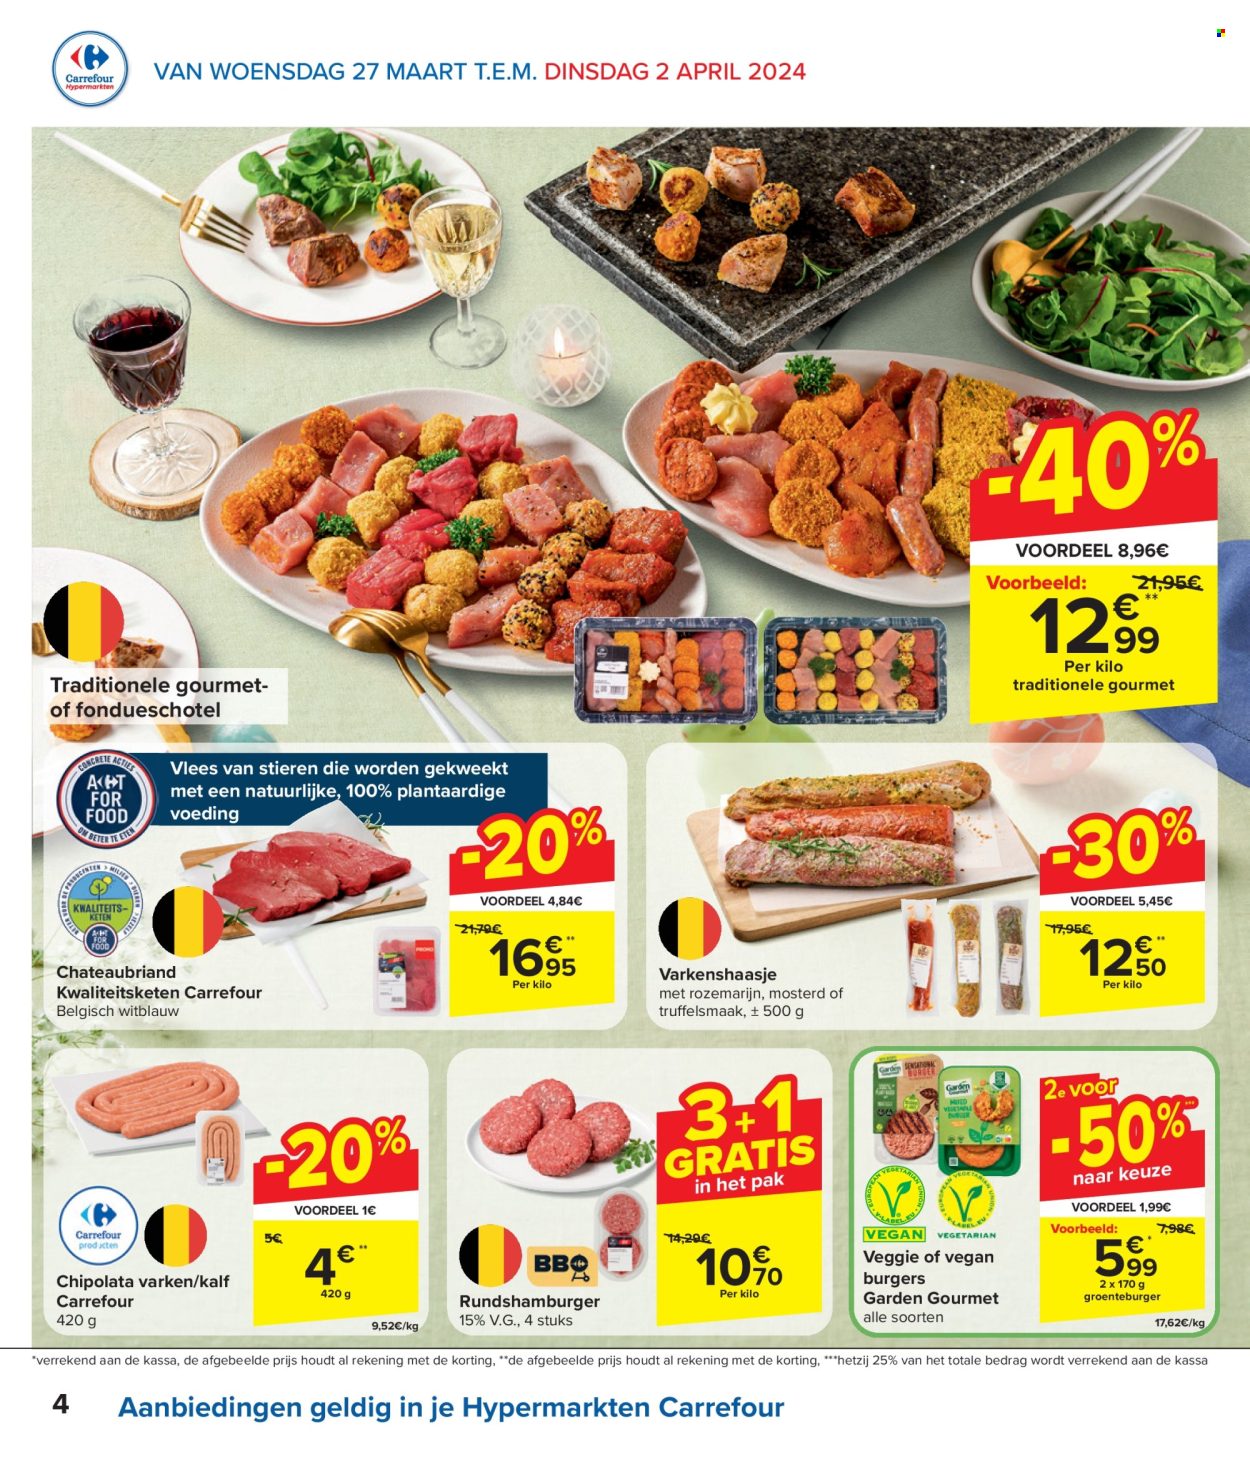 Catalogue Carrefour hypermarkt - 27.3.2024 - 8.4.2024. Page 4.